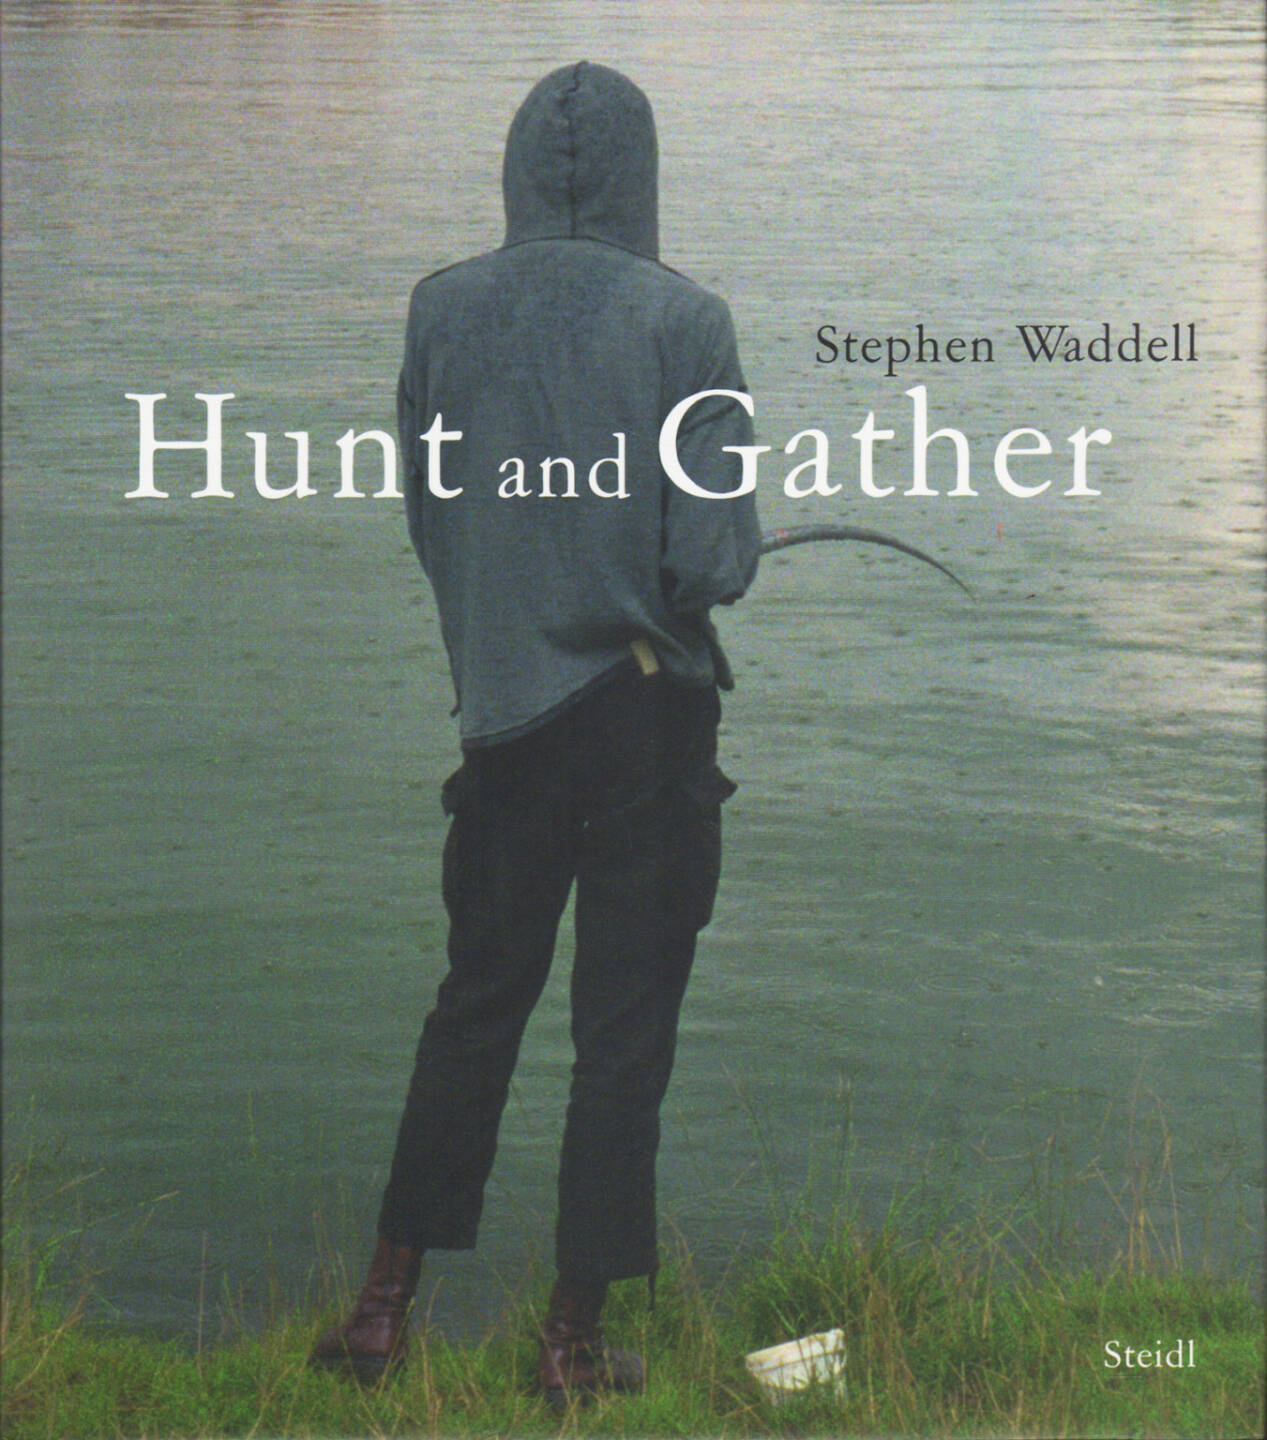 Stephen Waddell - Hunt and Gather, Steidl 2011, Cover - http://josefchladek.com/book/stephen_waddell_-_hunt_and_gather